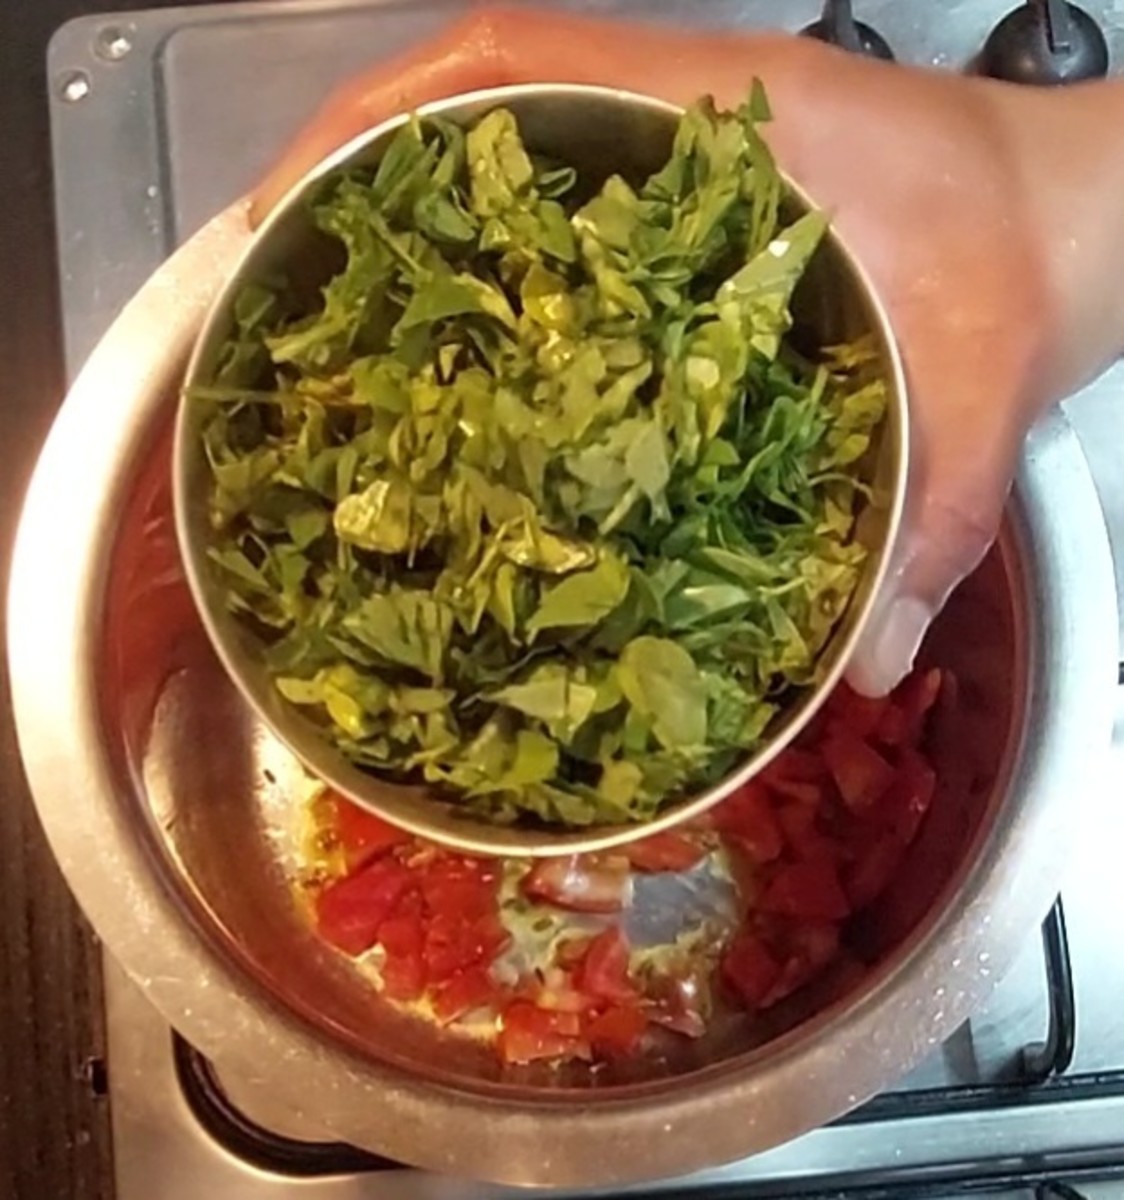 Add 1 cup cleaned and chopped methi leaves.